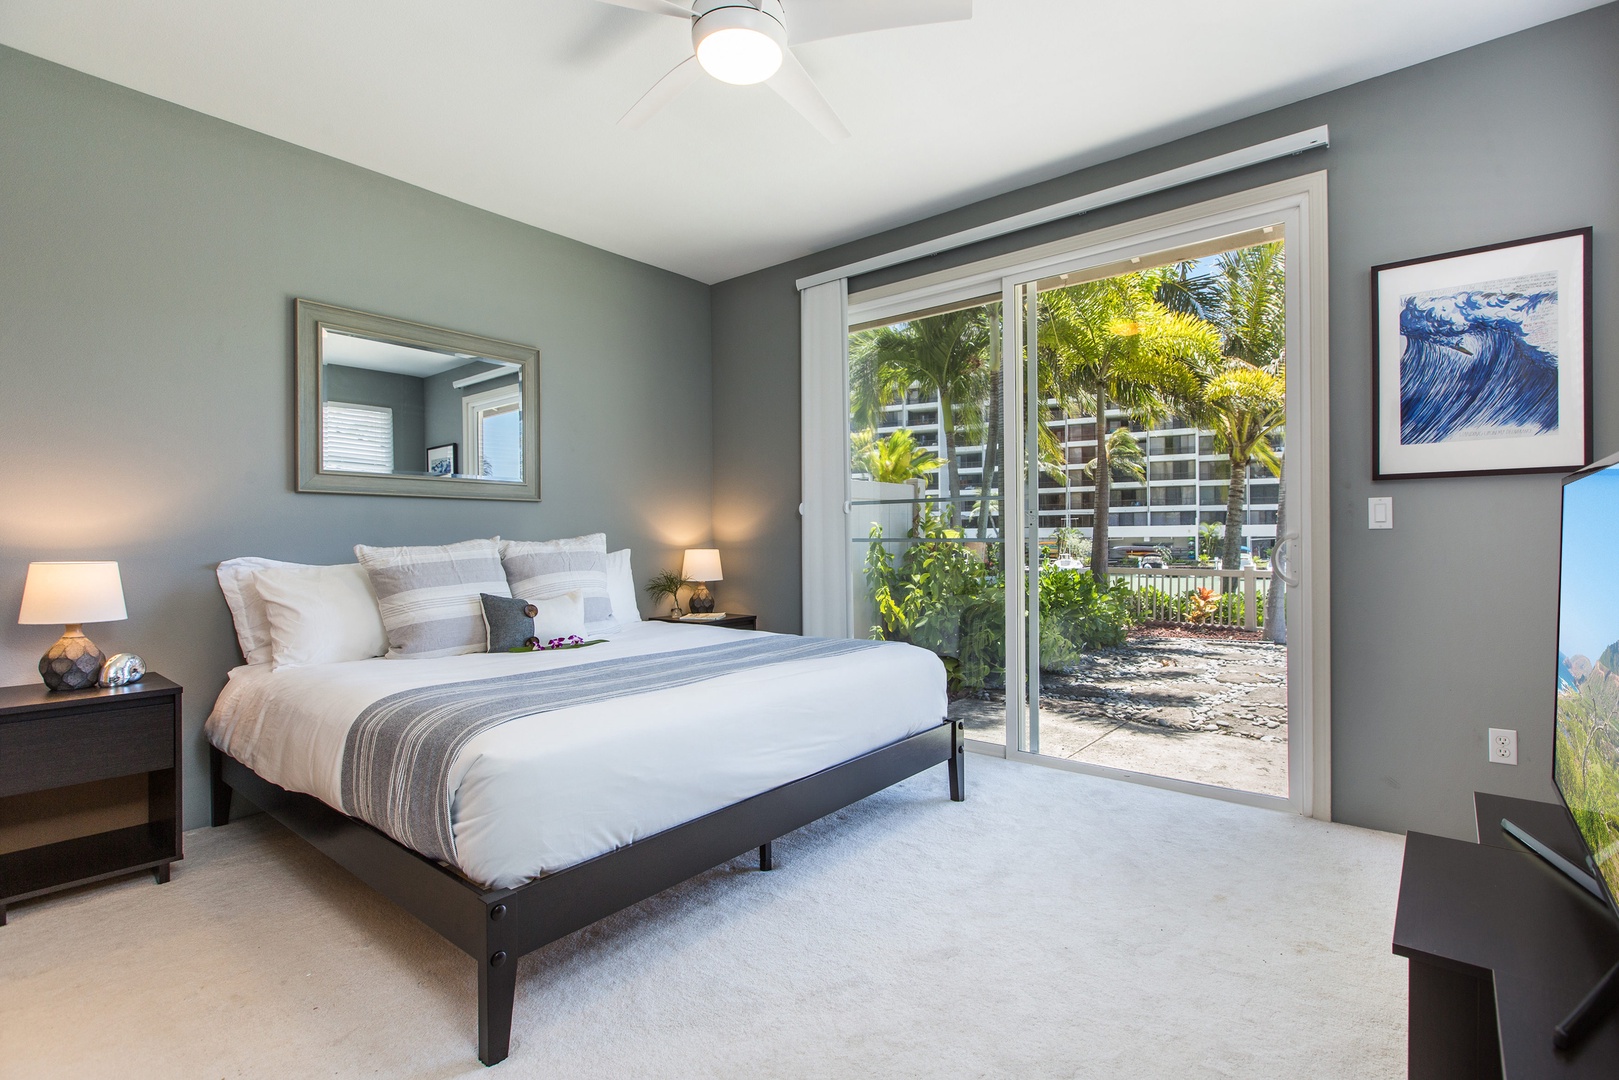 Honolulu Vacation Rentals, Ohana Kai - First-floor primary bedroom with en suite bathroom and sliding door that leads to the back yard.